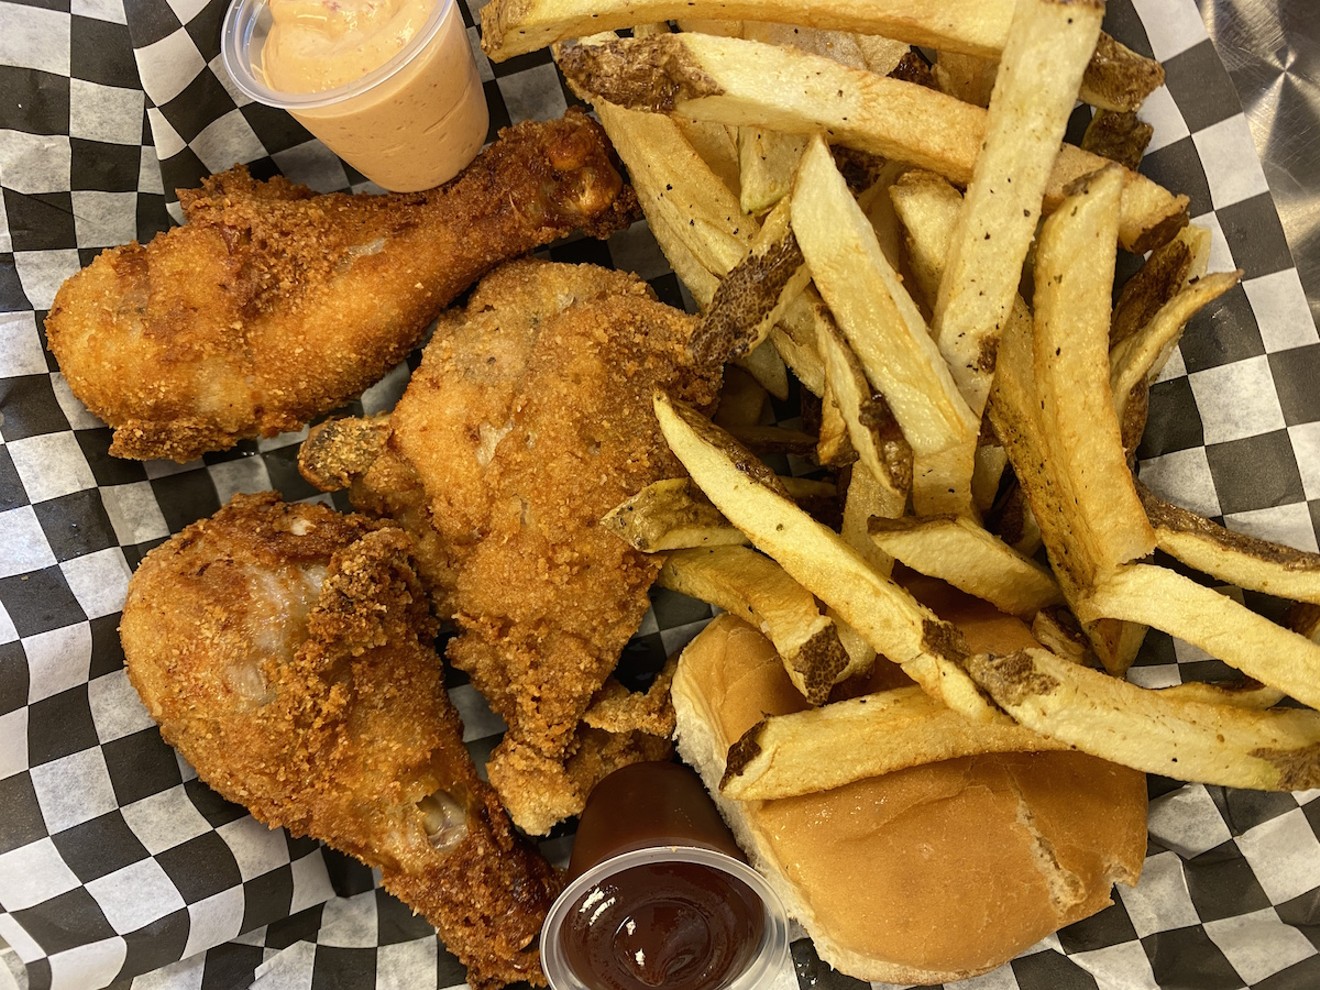 Caporal's beloved fried chicken snack boxes ($6.49) are passing into new hands.